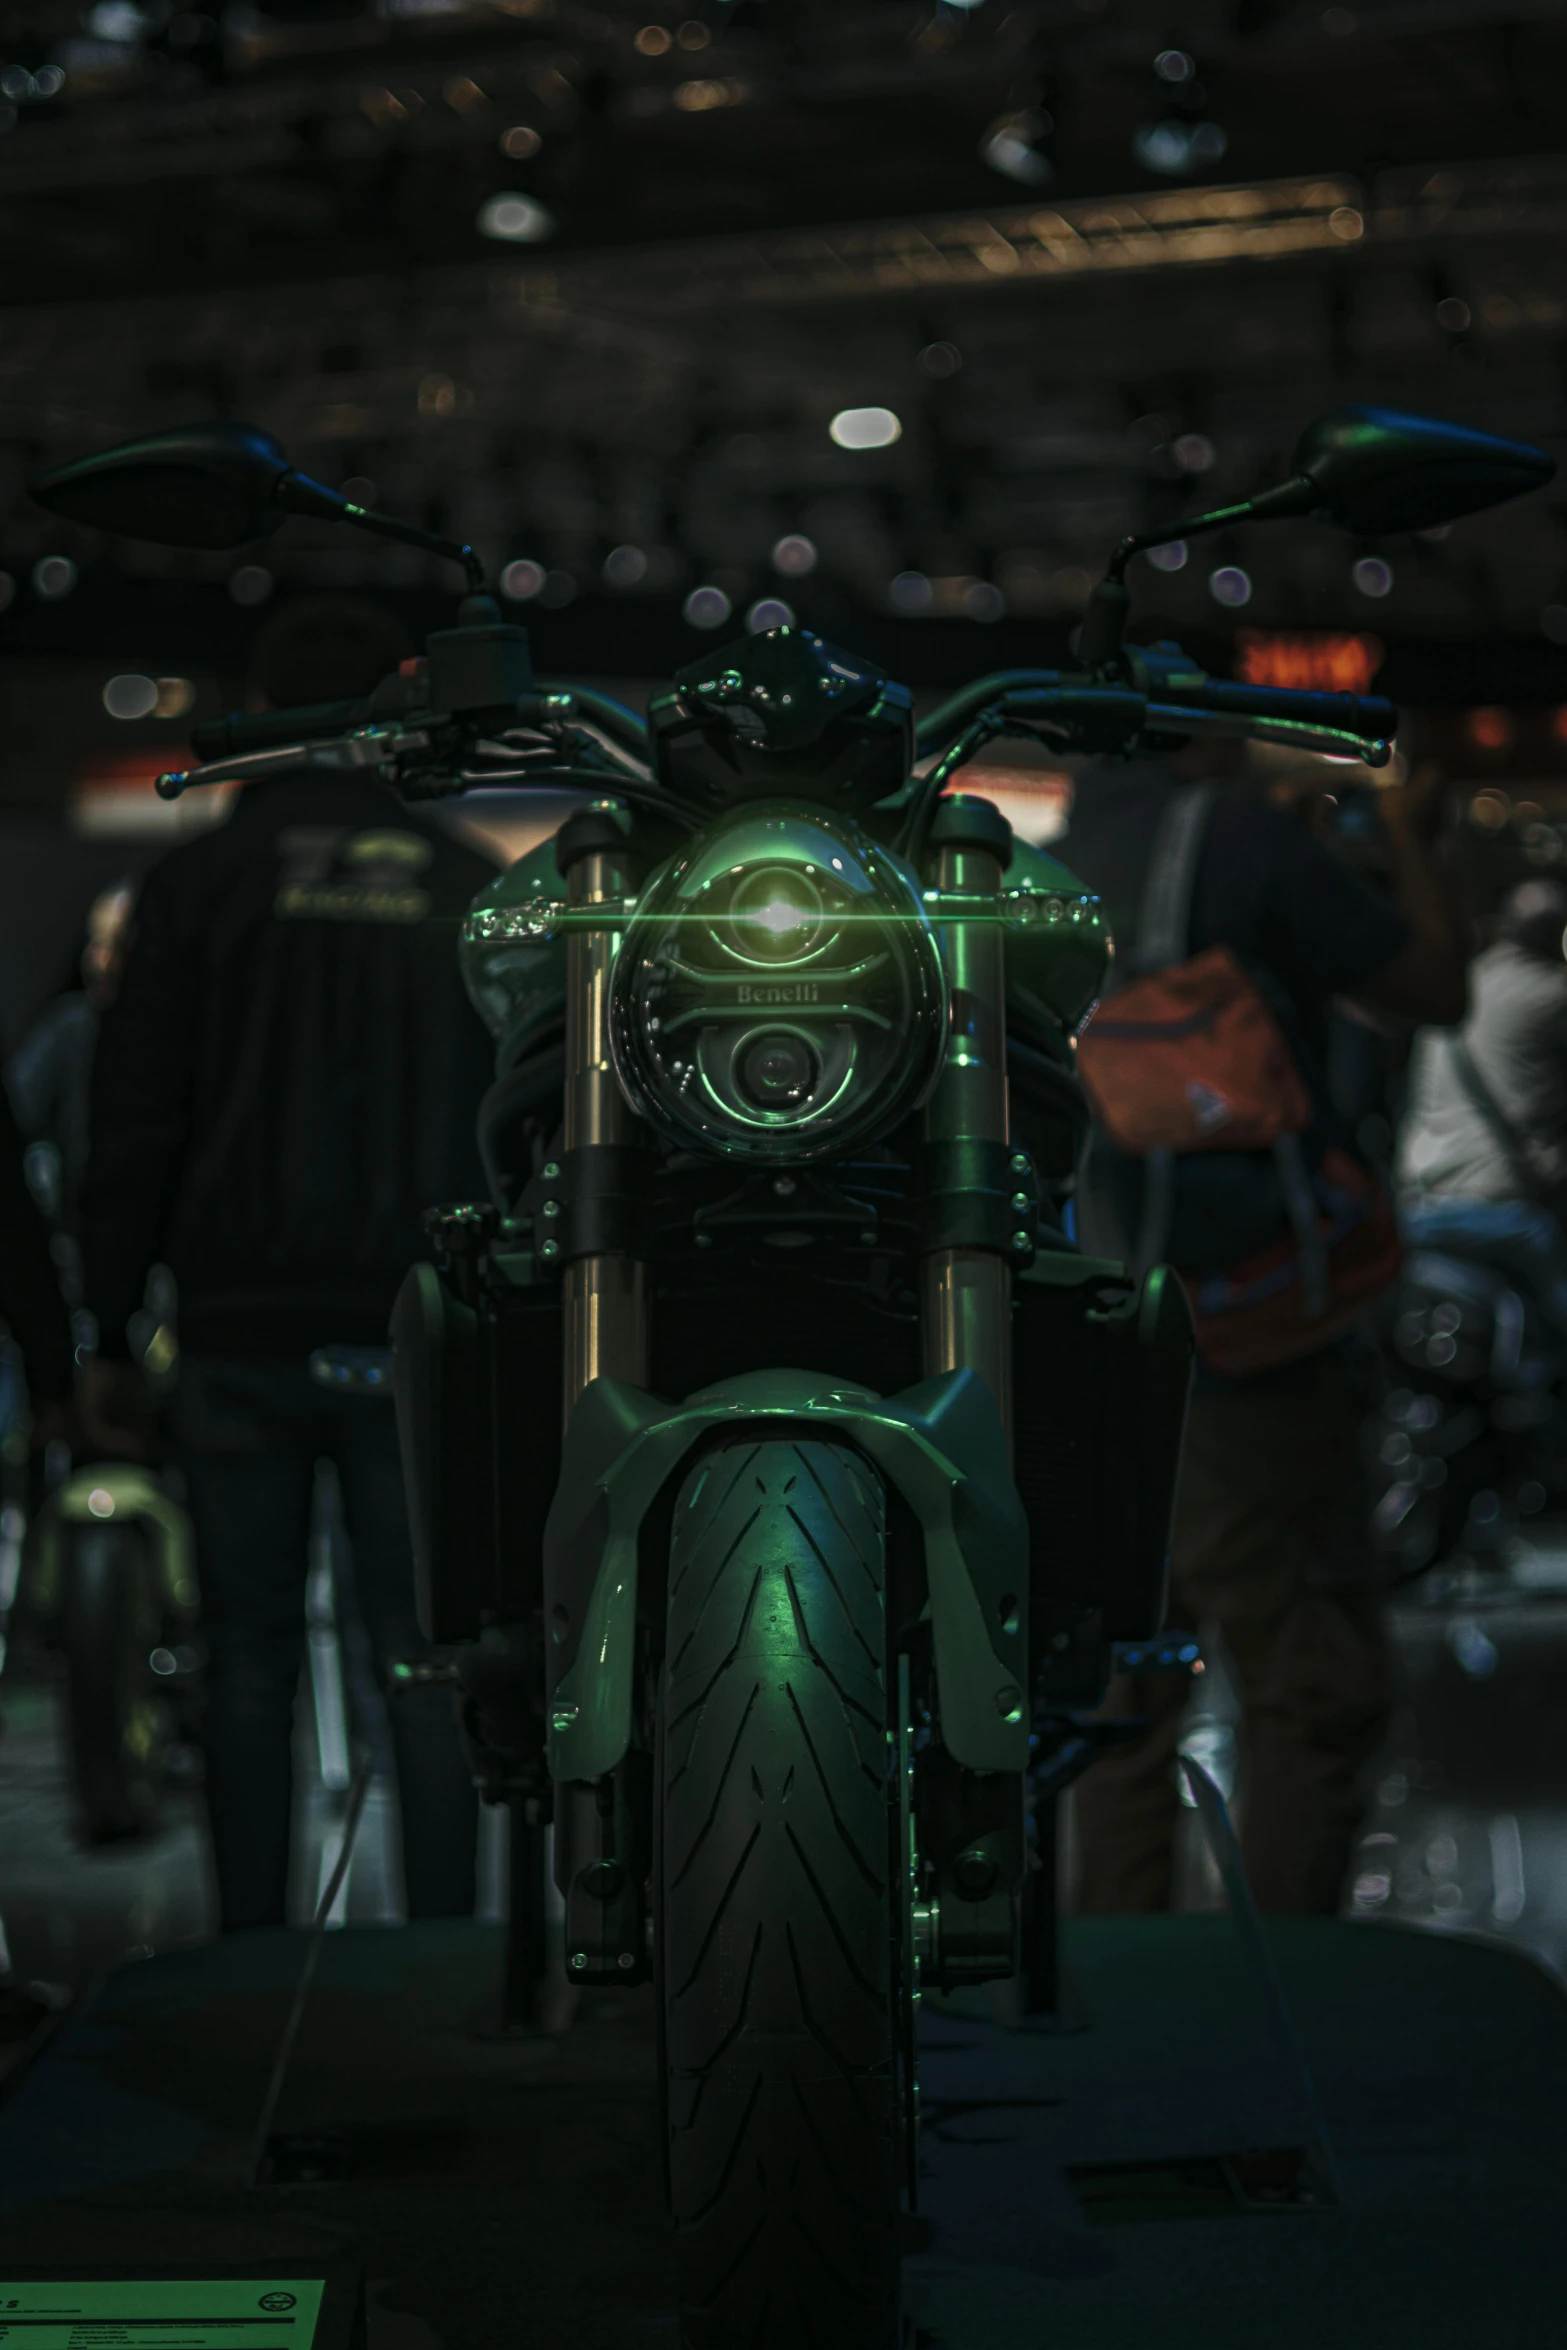 motorcycle with green lights parked in a dark room